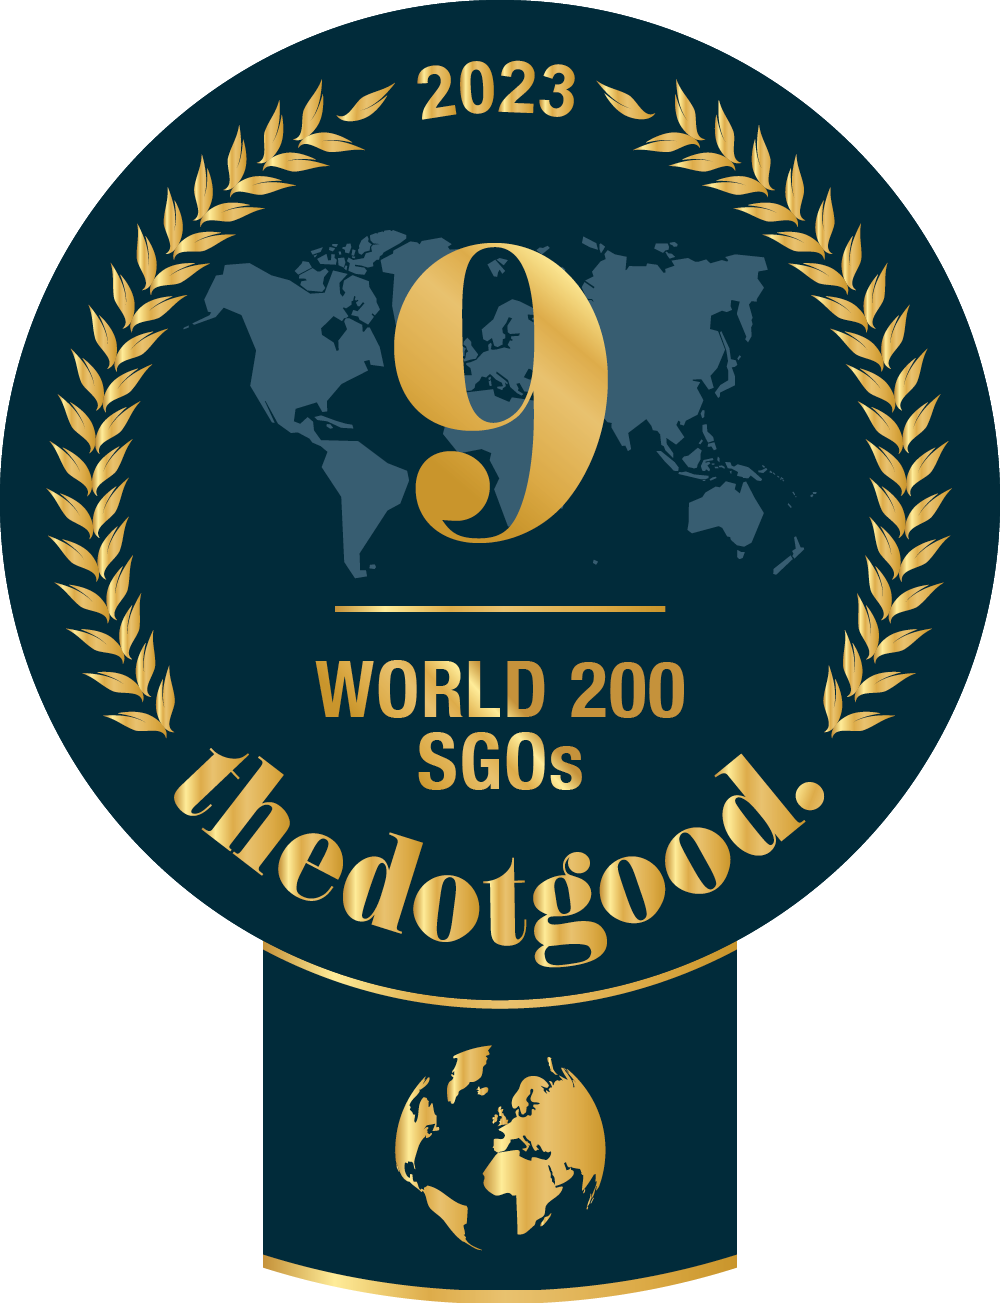 CURE VIOLENCE GLOBAL is world ranked on thedotgood.